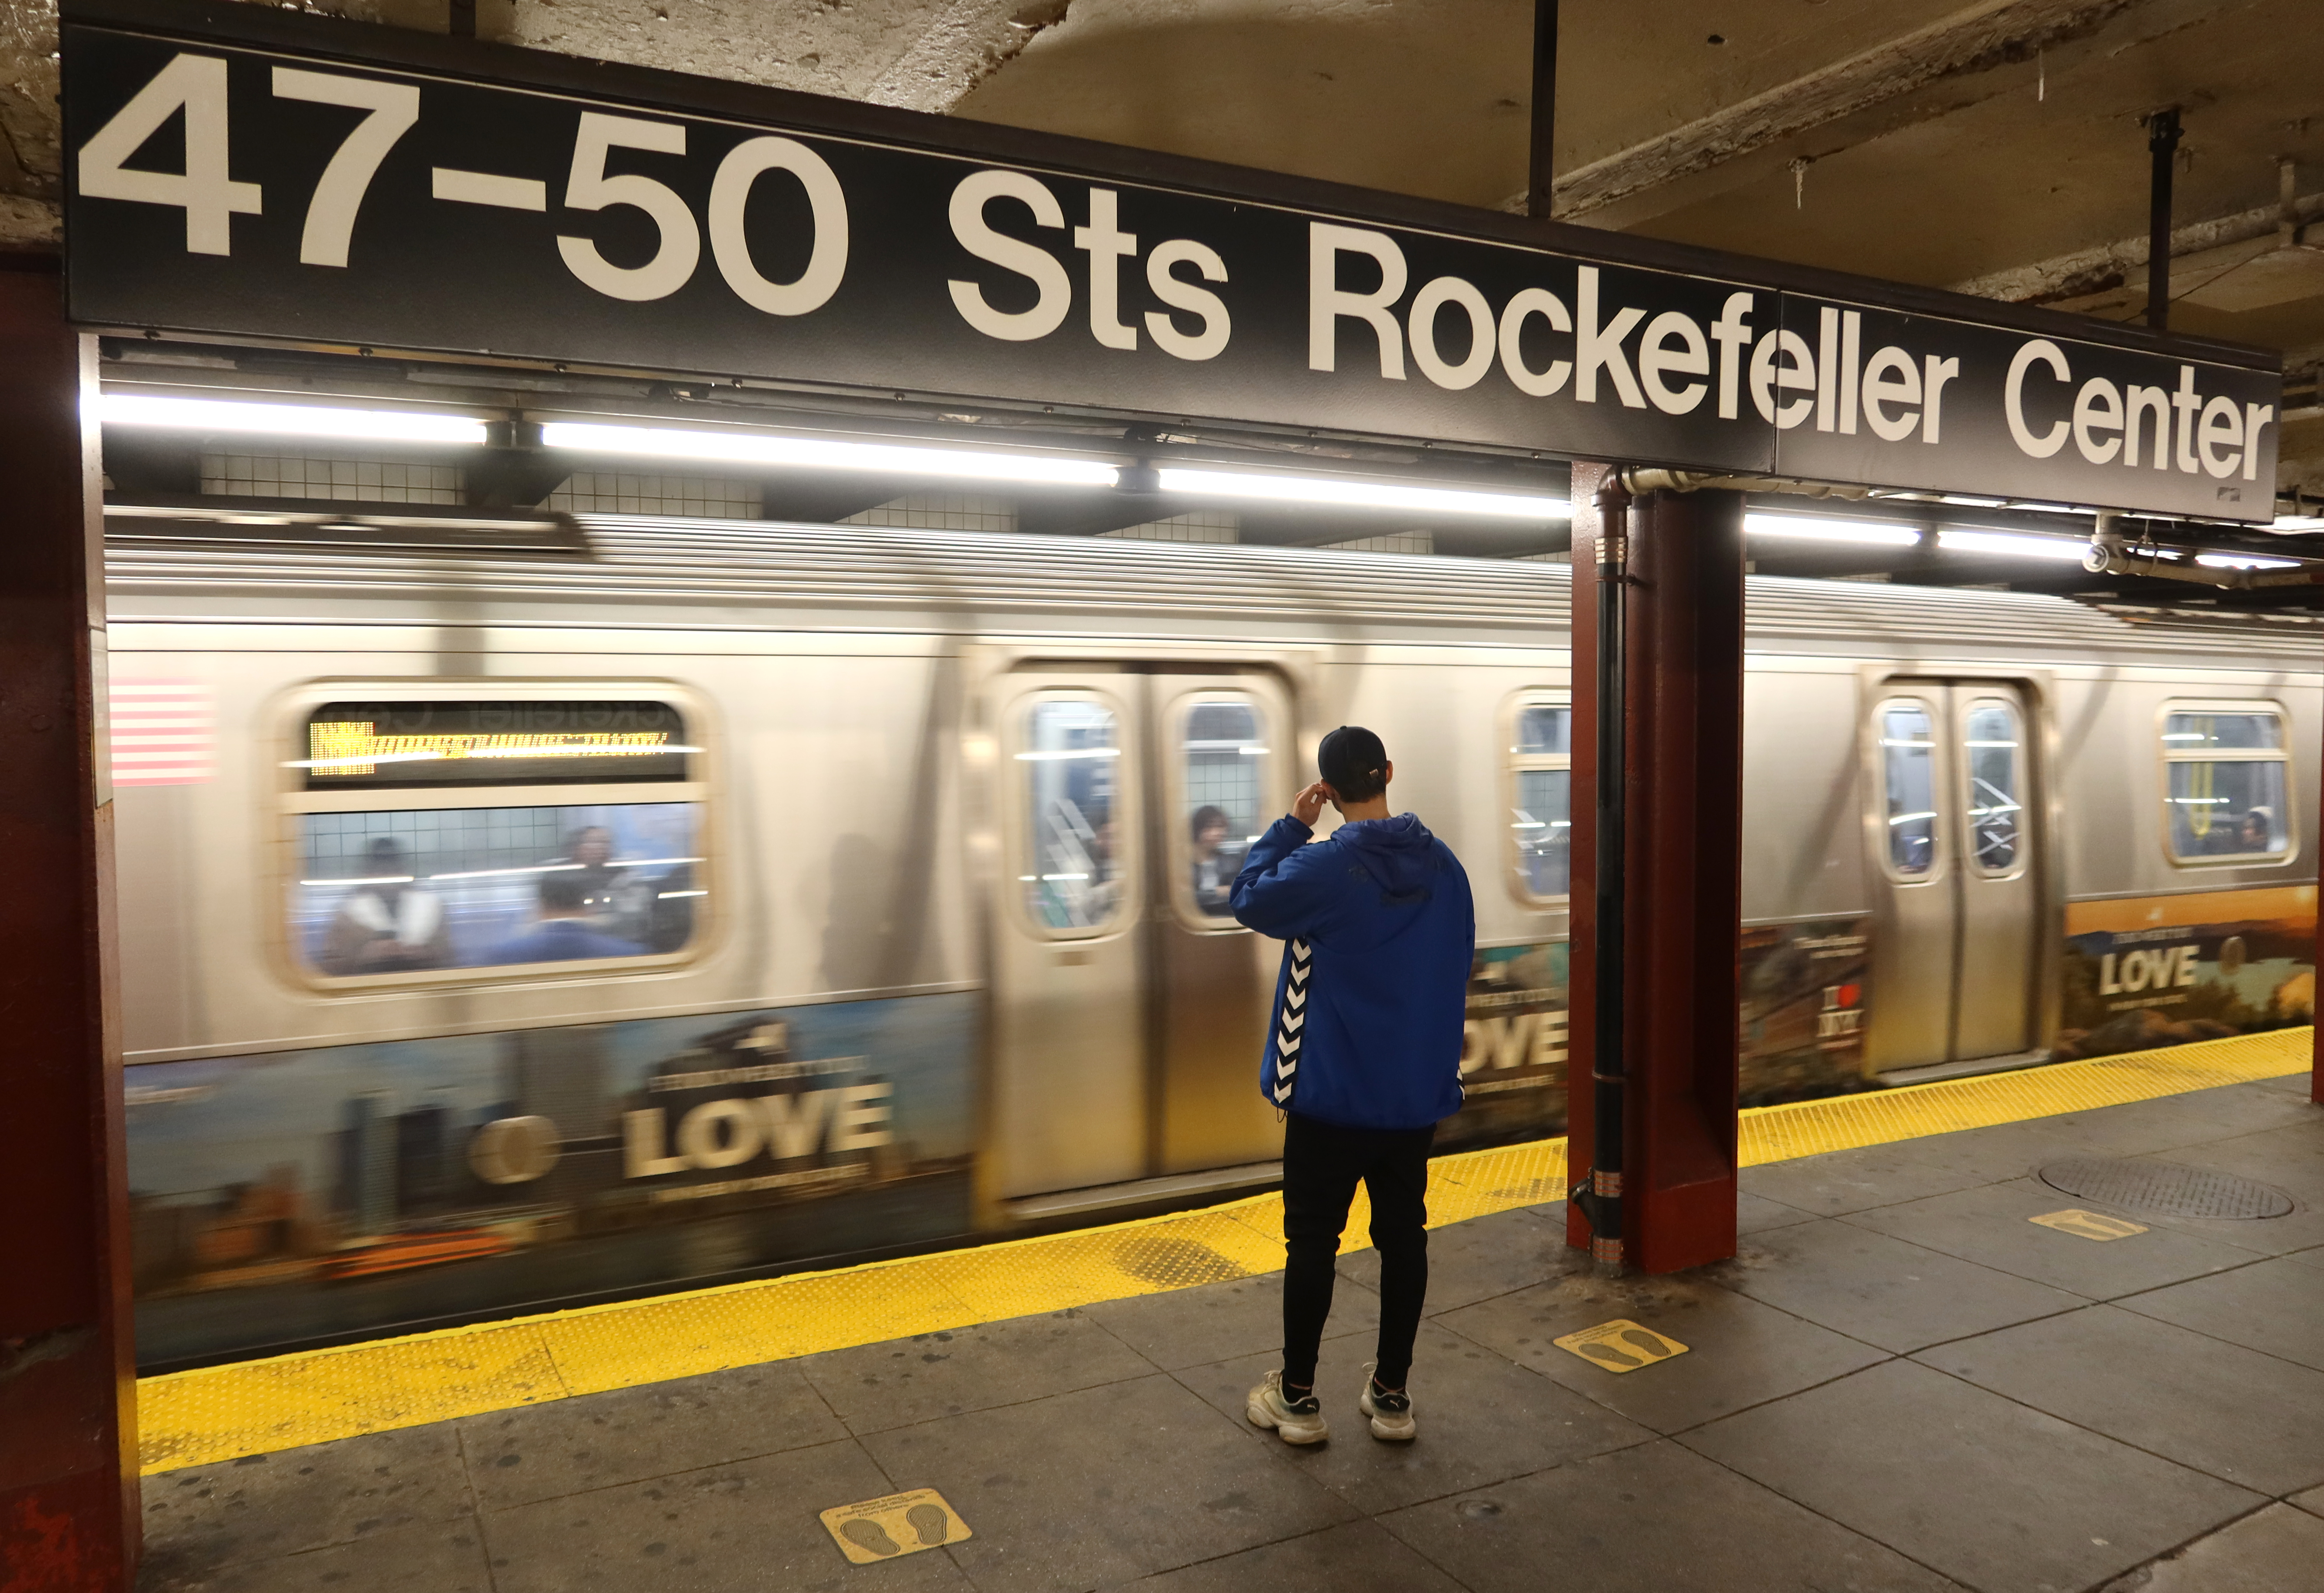 A stock photo of the 47-50th Station